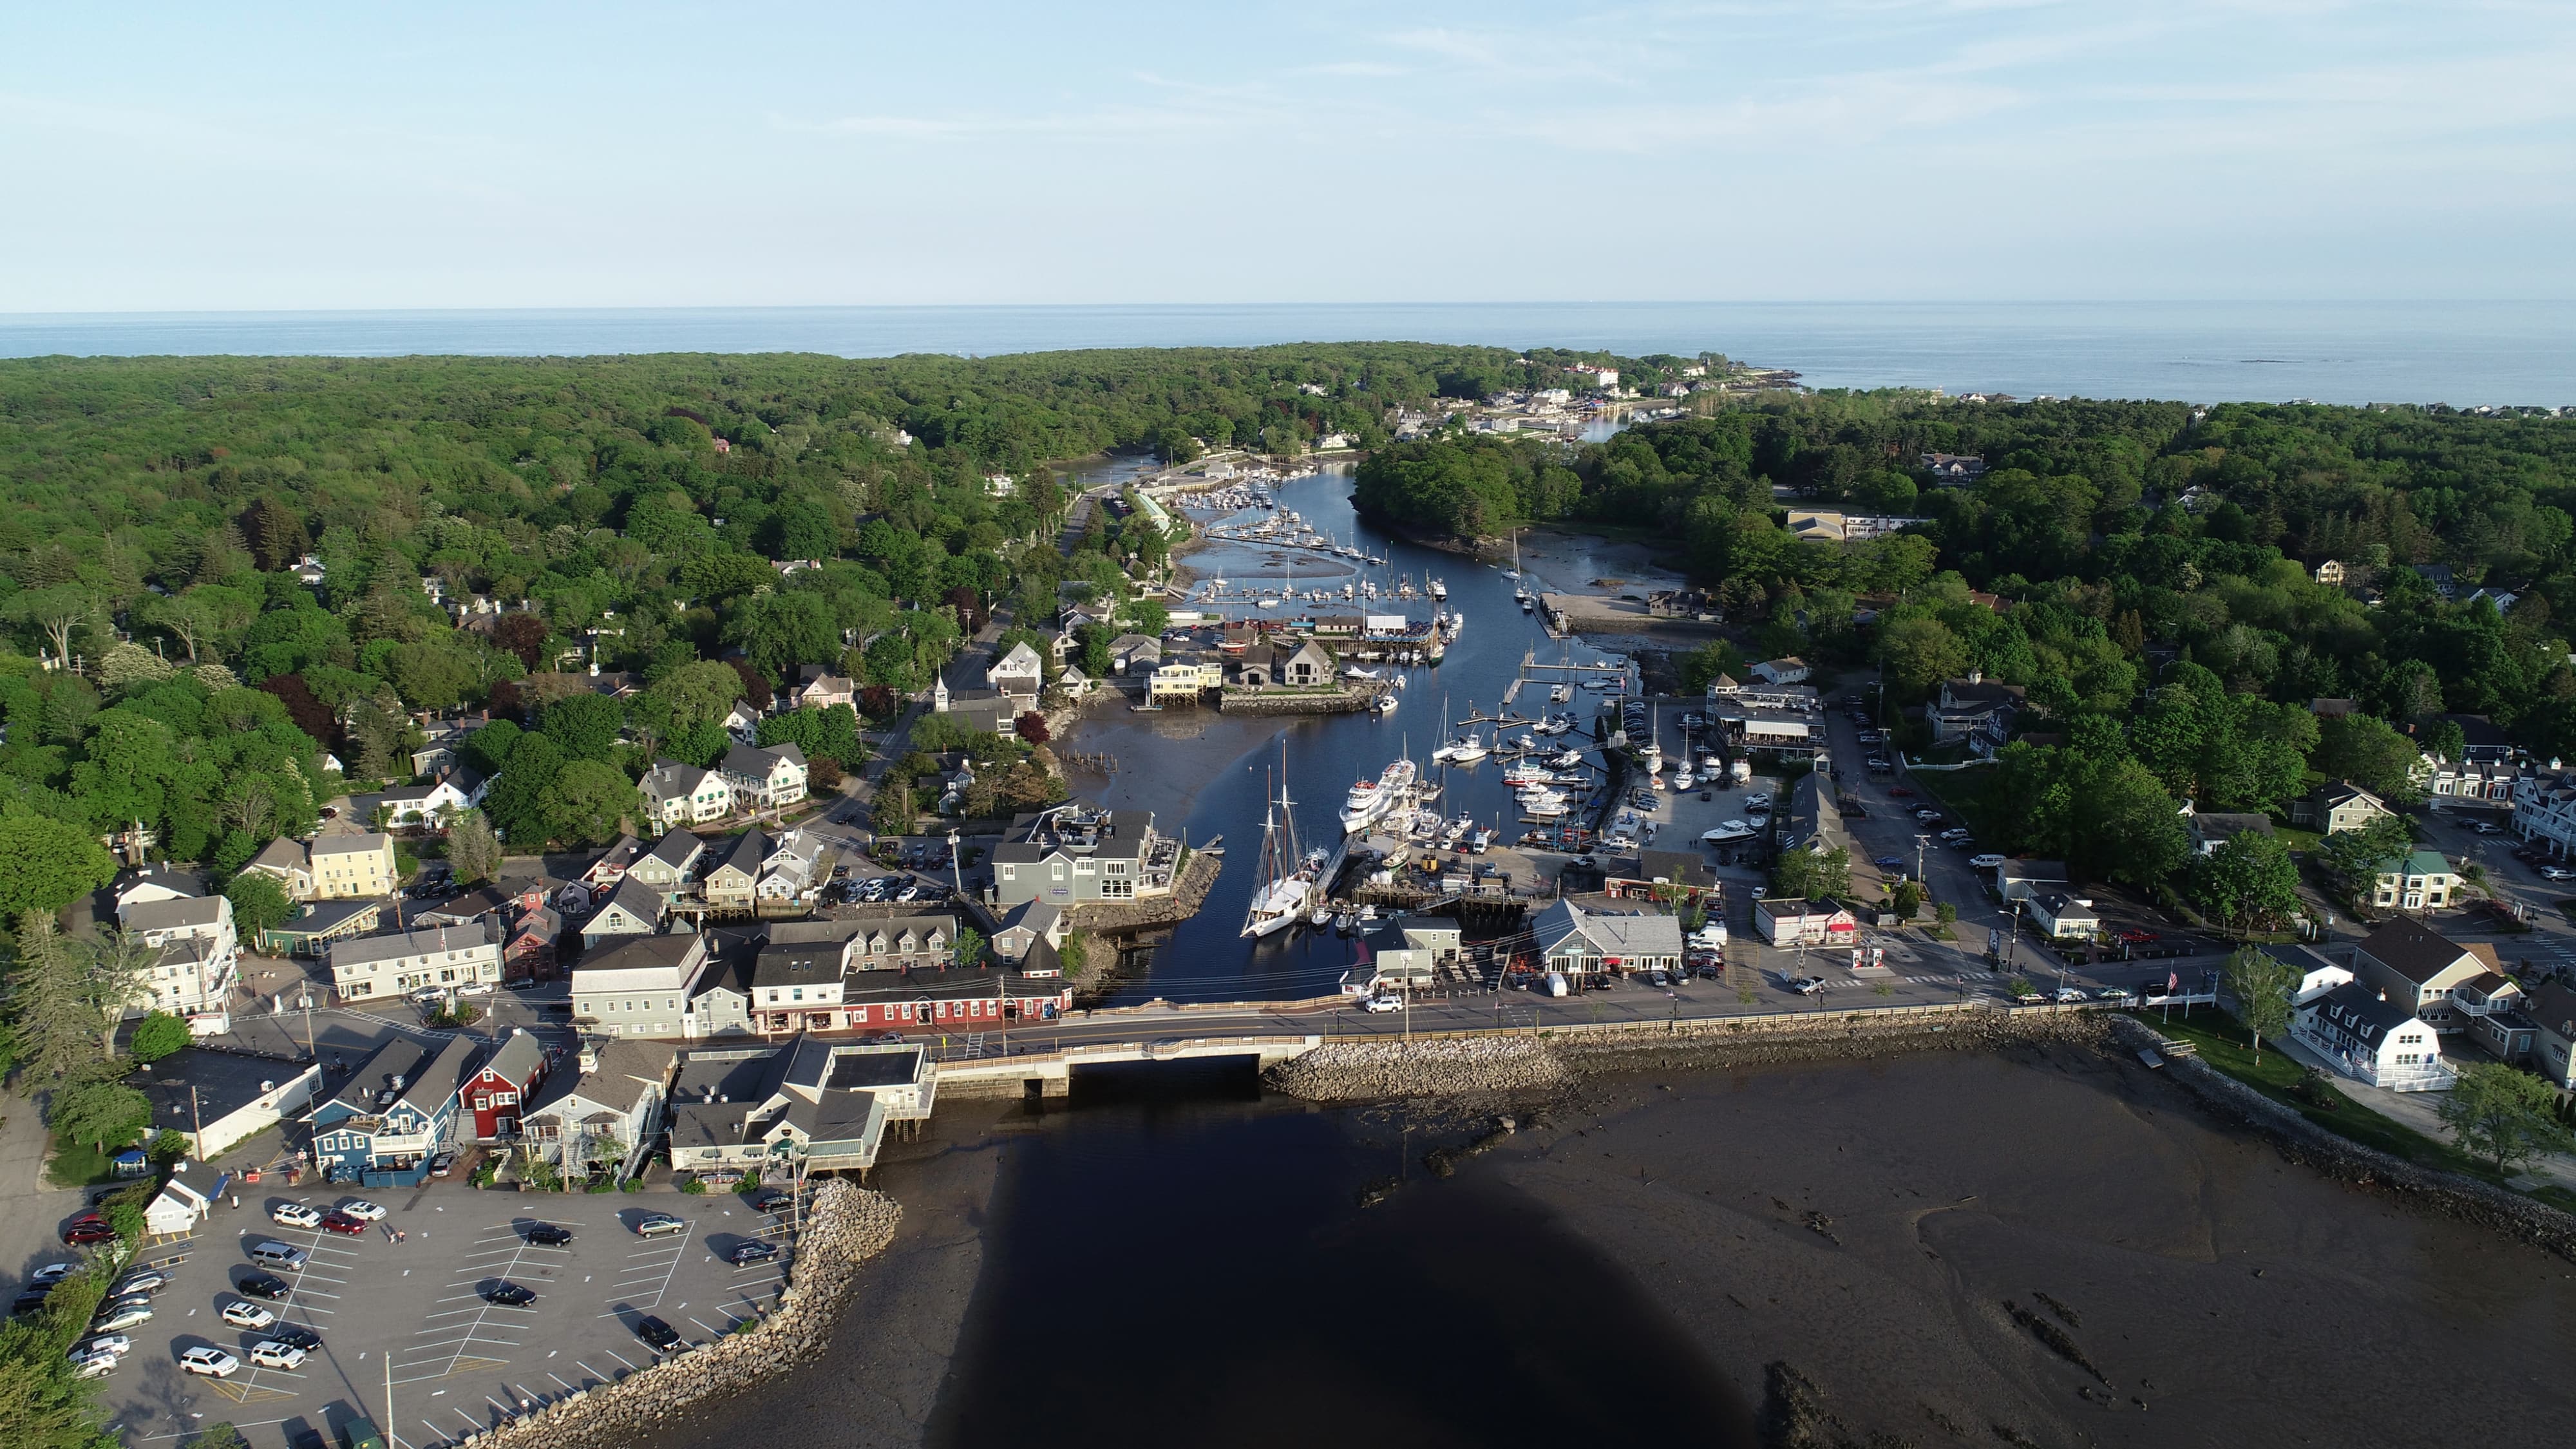 Aerial view of Kennebunkport with boats docked